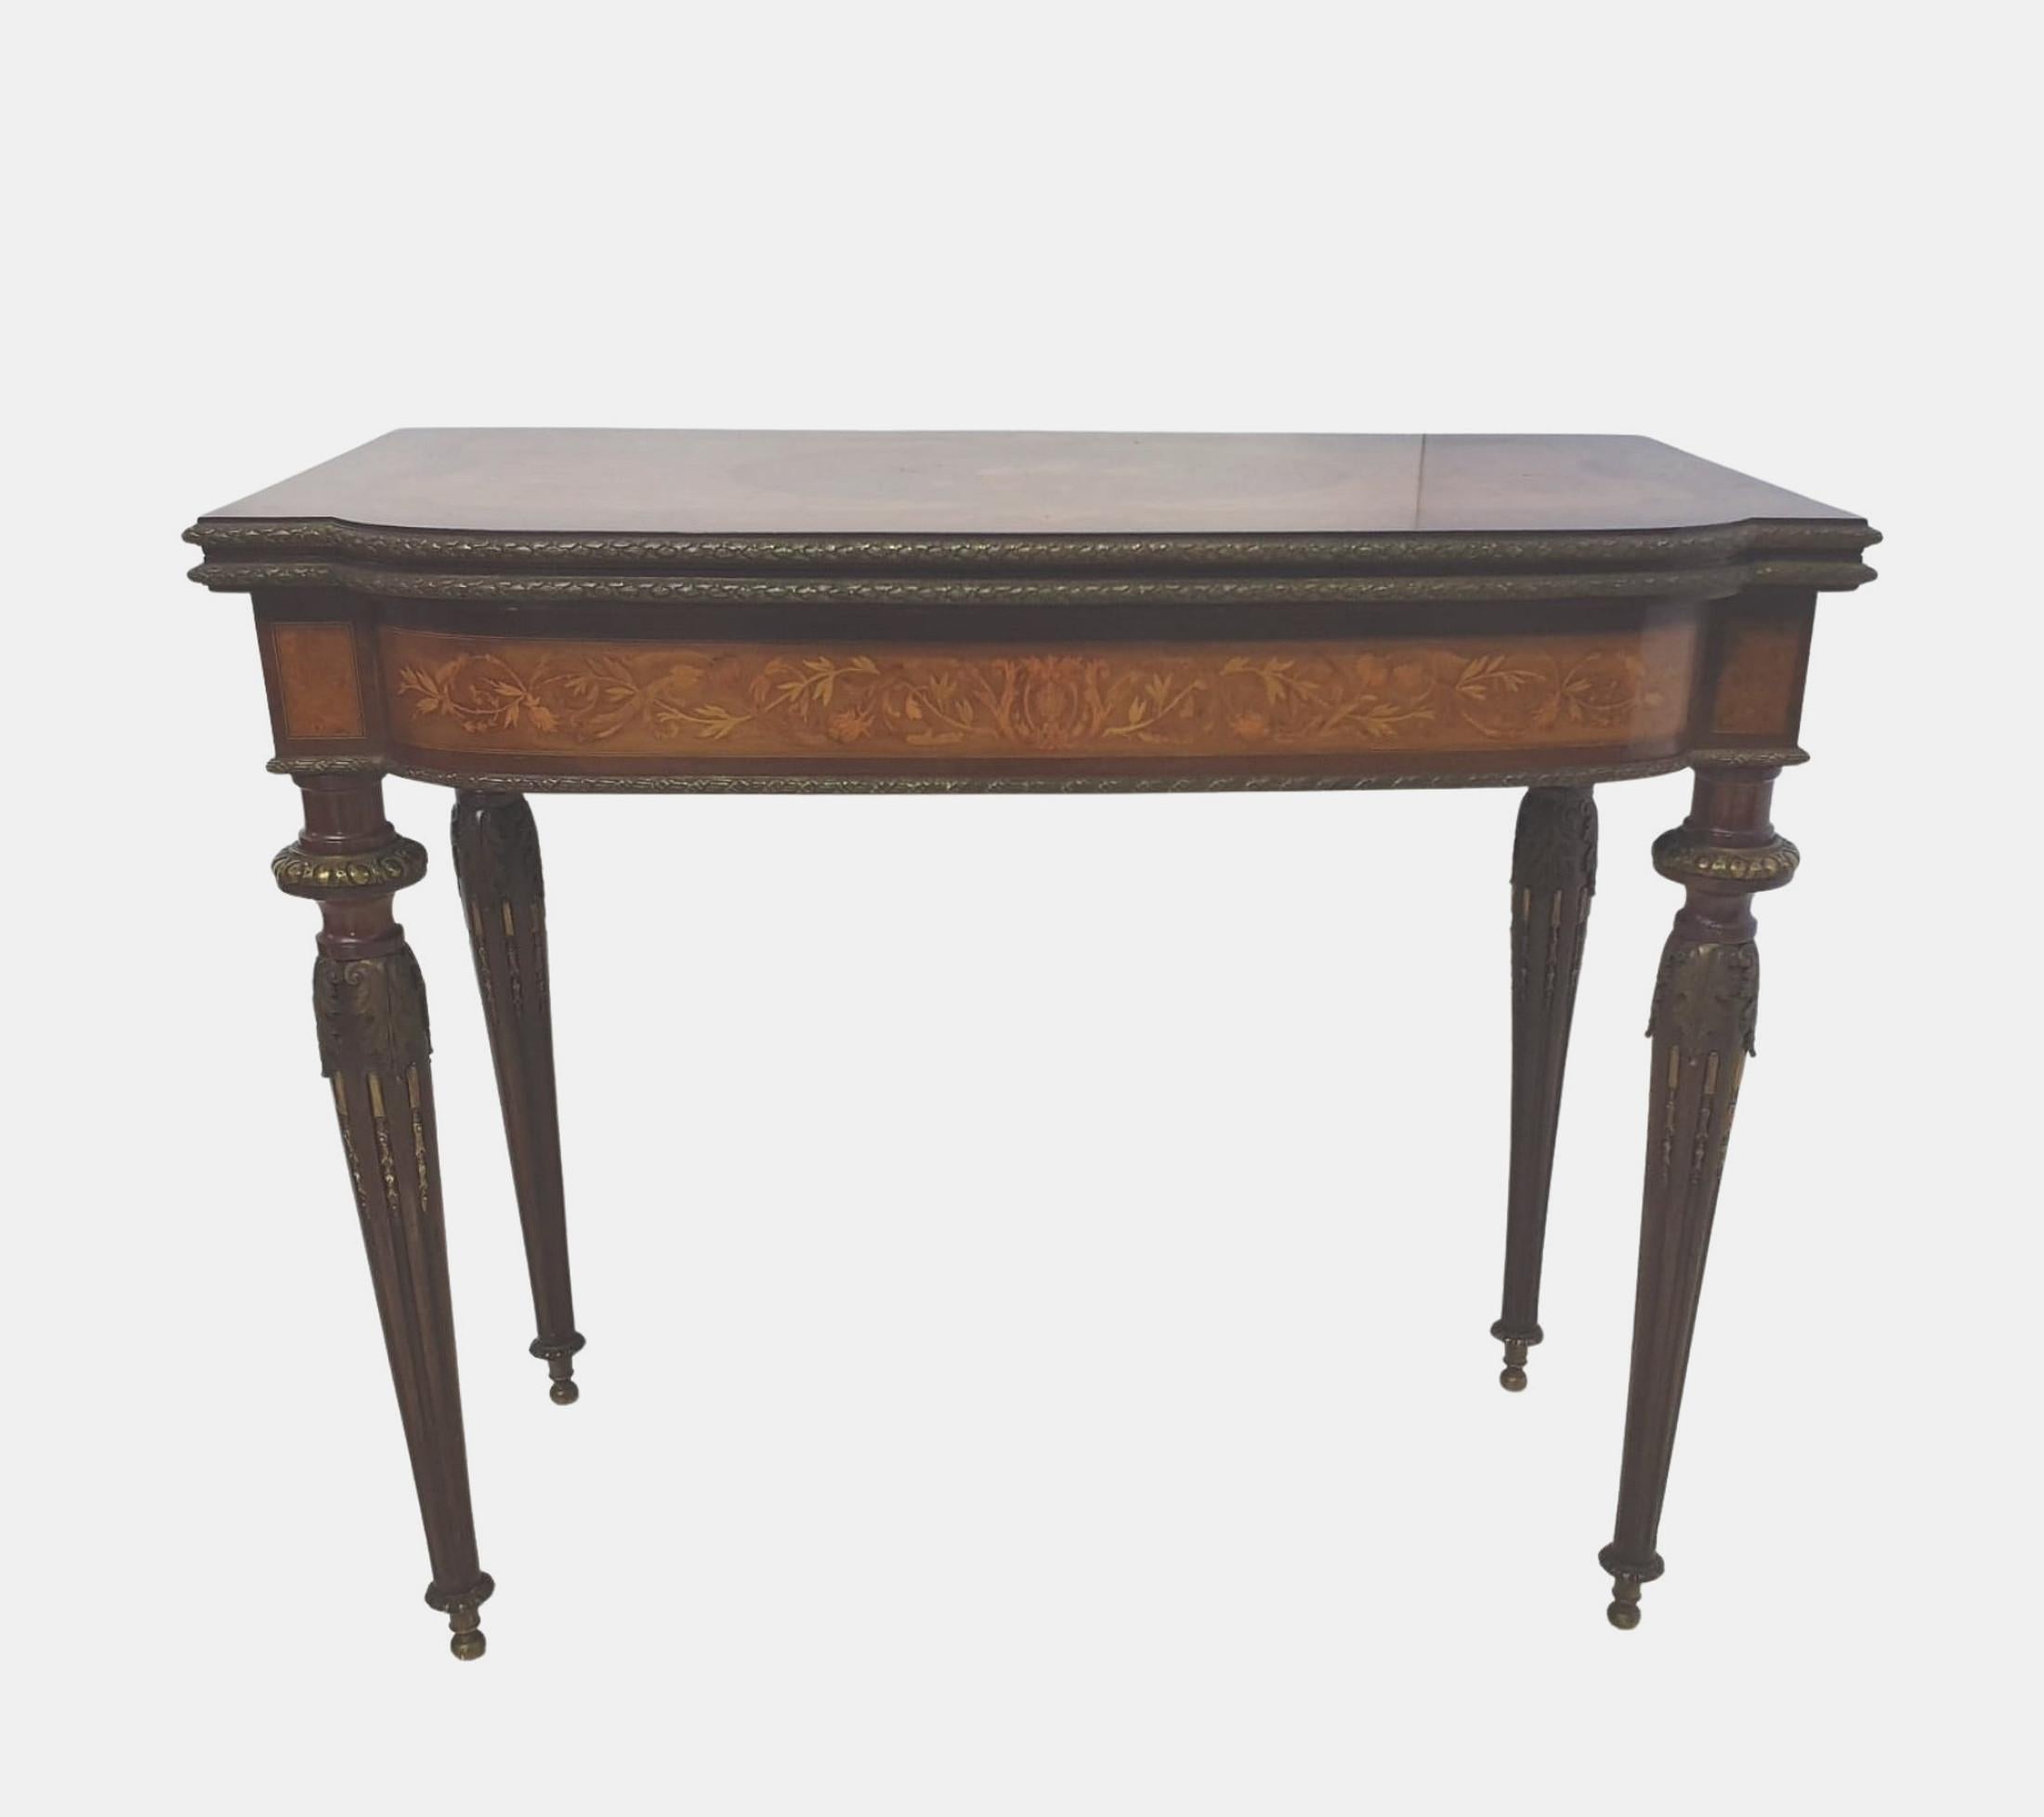 A rare museum quality 19th Century marquetry inlaid turn over leaf card table with ormolu mounts thoughout. The shaped and moulded top of rectangular form with intricate marquetry inlay centred with a cartouche depicting musical instruments and